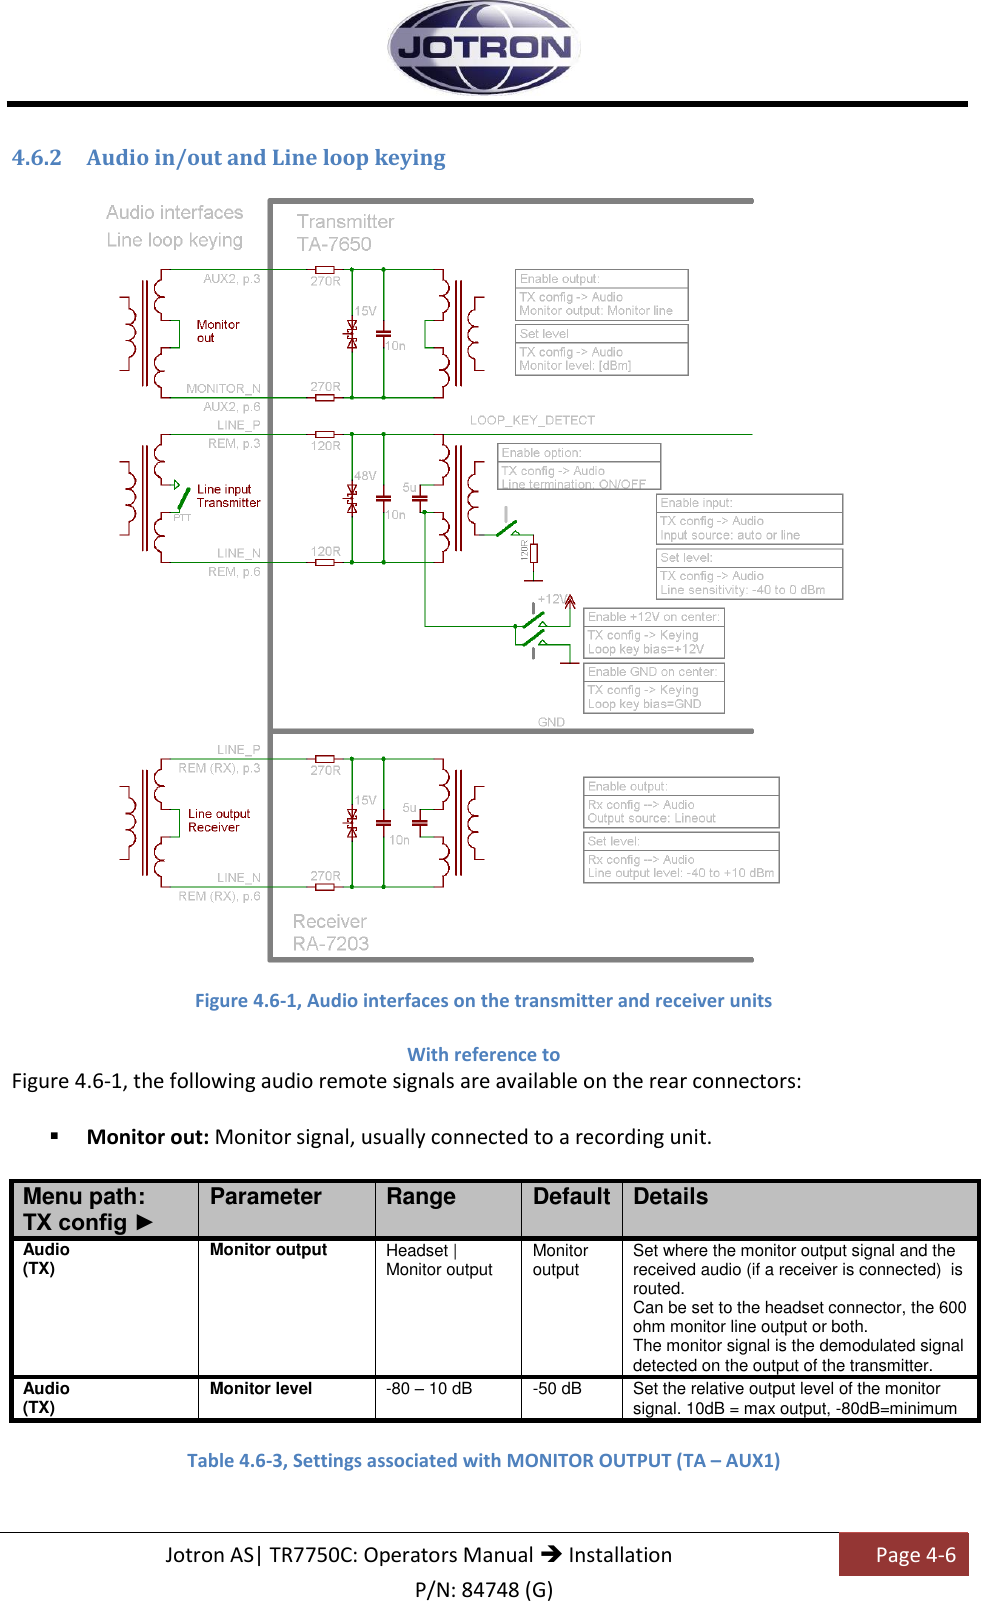   Jotron AS| TR7750C: Operators Manual  Installation Page 4-6 P/N: 84748 (G) 4.6.2 Audio in/out and Line loop keying    Figure 4.6-1, Audio interfaces on the transmitter and receiver units  With reference to  Figure 4.6-1, the following audio remote signals are available on the rear connectors:   Monitor out: Monitor signal, usually connected to a recording unit.  Menu path: TX config ► Parameter Range Default Details Audio (TX) Monitor output Headset | Monitor output Monitor output Set where the monitor output signal and the received audio (if a receiver is connected)  is routed.  Can be set to the headset connector, the 600 ohm monitor line output or both. The monitor signal is the demodulated signal detected on the output of the transmitter. Audio (TX) Monitor level -80 – 10 dB -50 dB Set the relative output level of the monitor signal. 10dB = max output, -80dB=minimum  Table 4.6-3, Settings associated with MONITOR OUTPUT (TA – AUX1)    